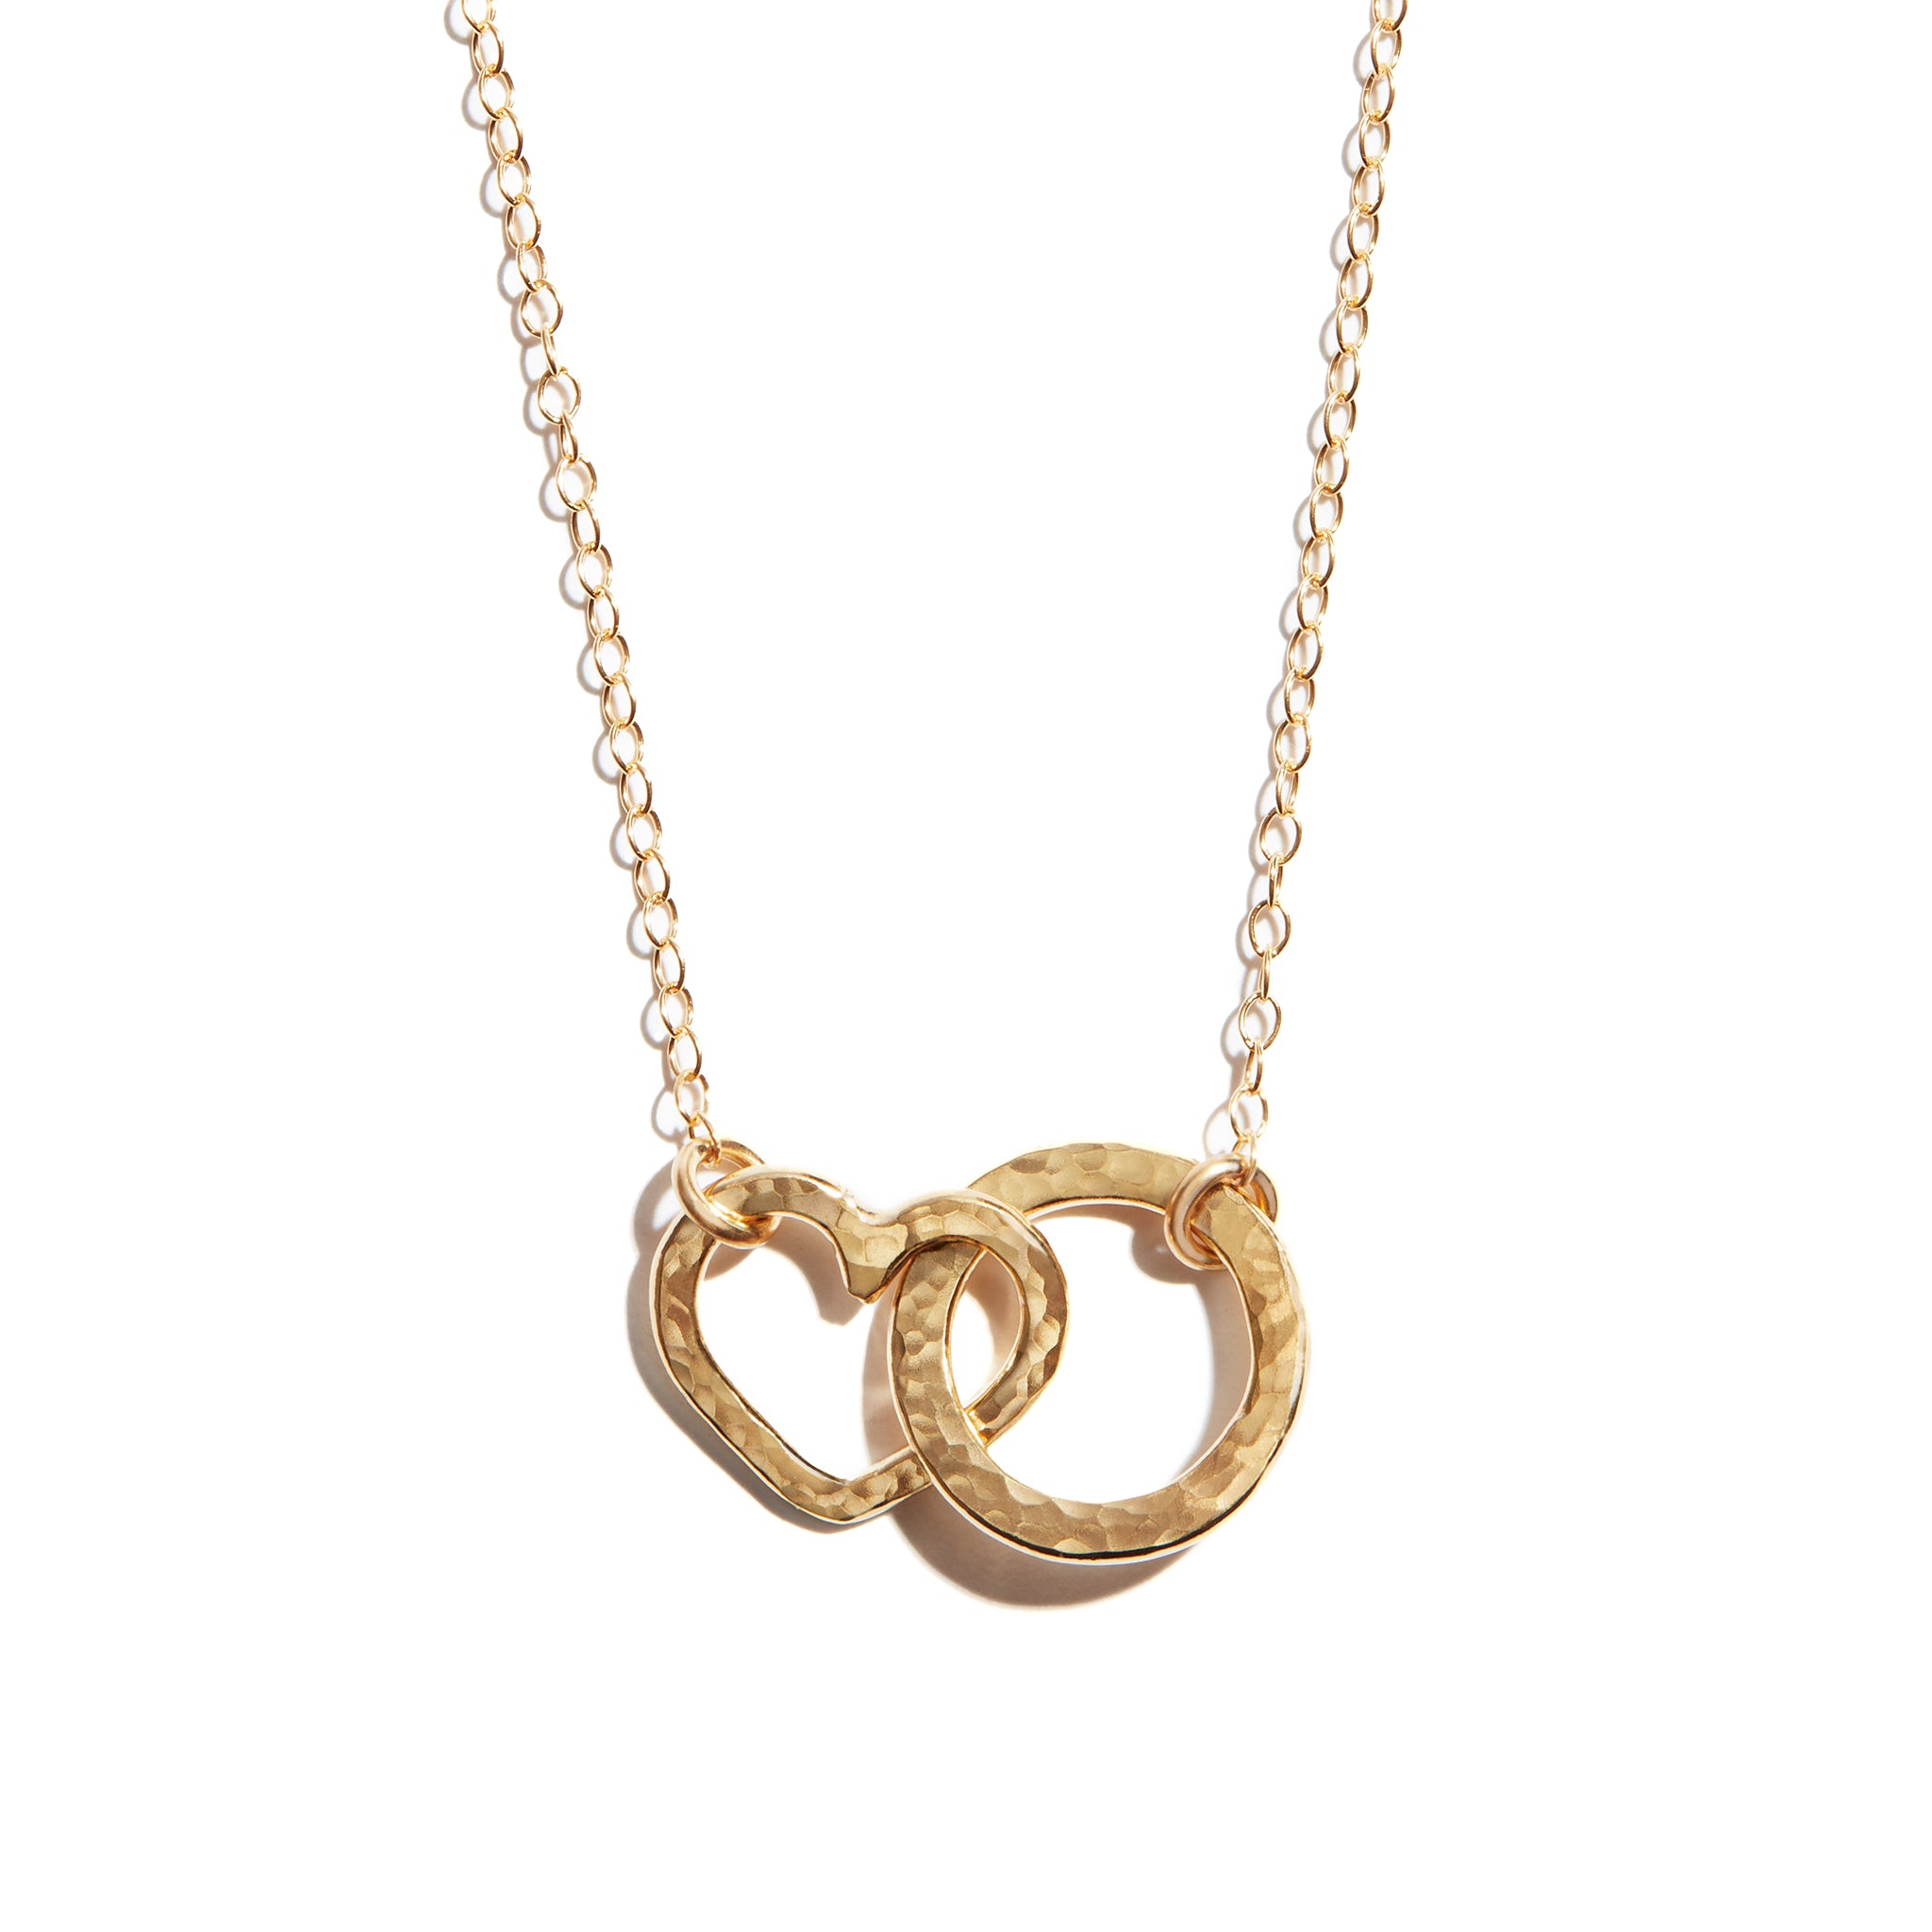 ﻿Photo of a double heart and circle necklace made from 14 carat gold fill. A charming accesory ideal for gifting or adding a touch of elegance to any outfit.